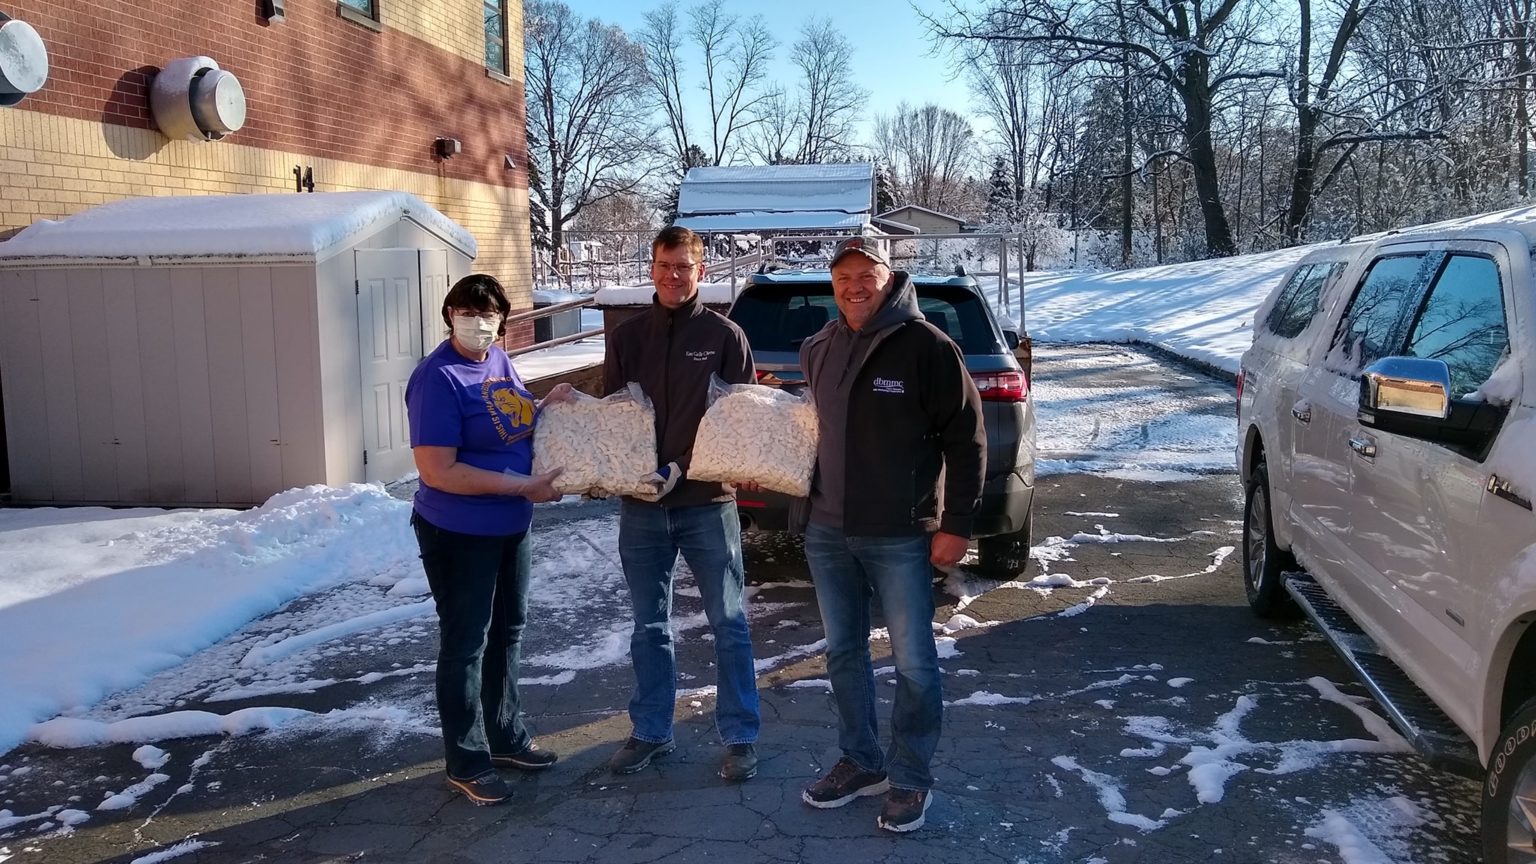 Cindy Reinhardt from the Durand Arkansaw School District accepts a donation from Steve Bechel of Eau Galle Cheese Factory and Don Weiss from Weiss Family Farms. (Courtesy: Brian Winnekins)